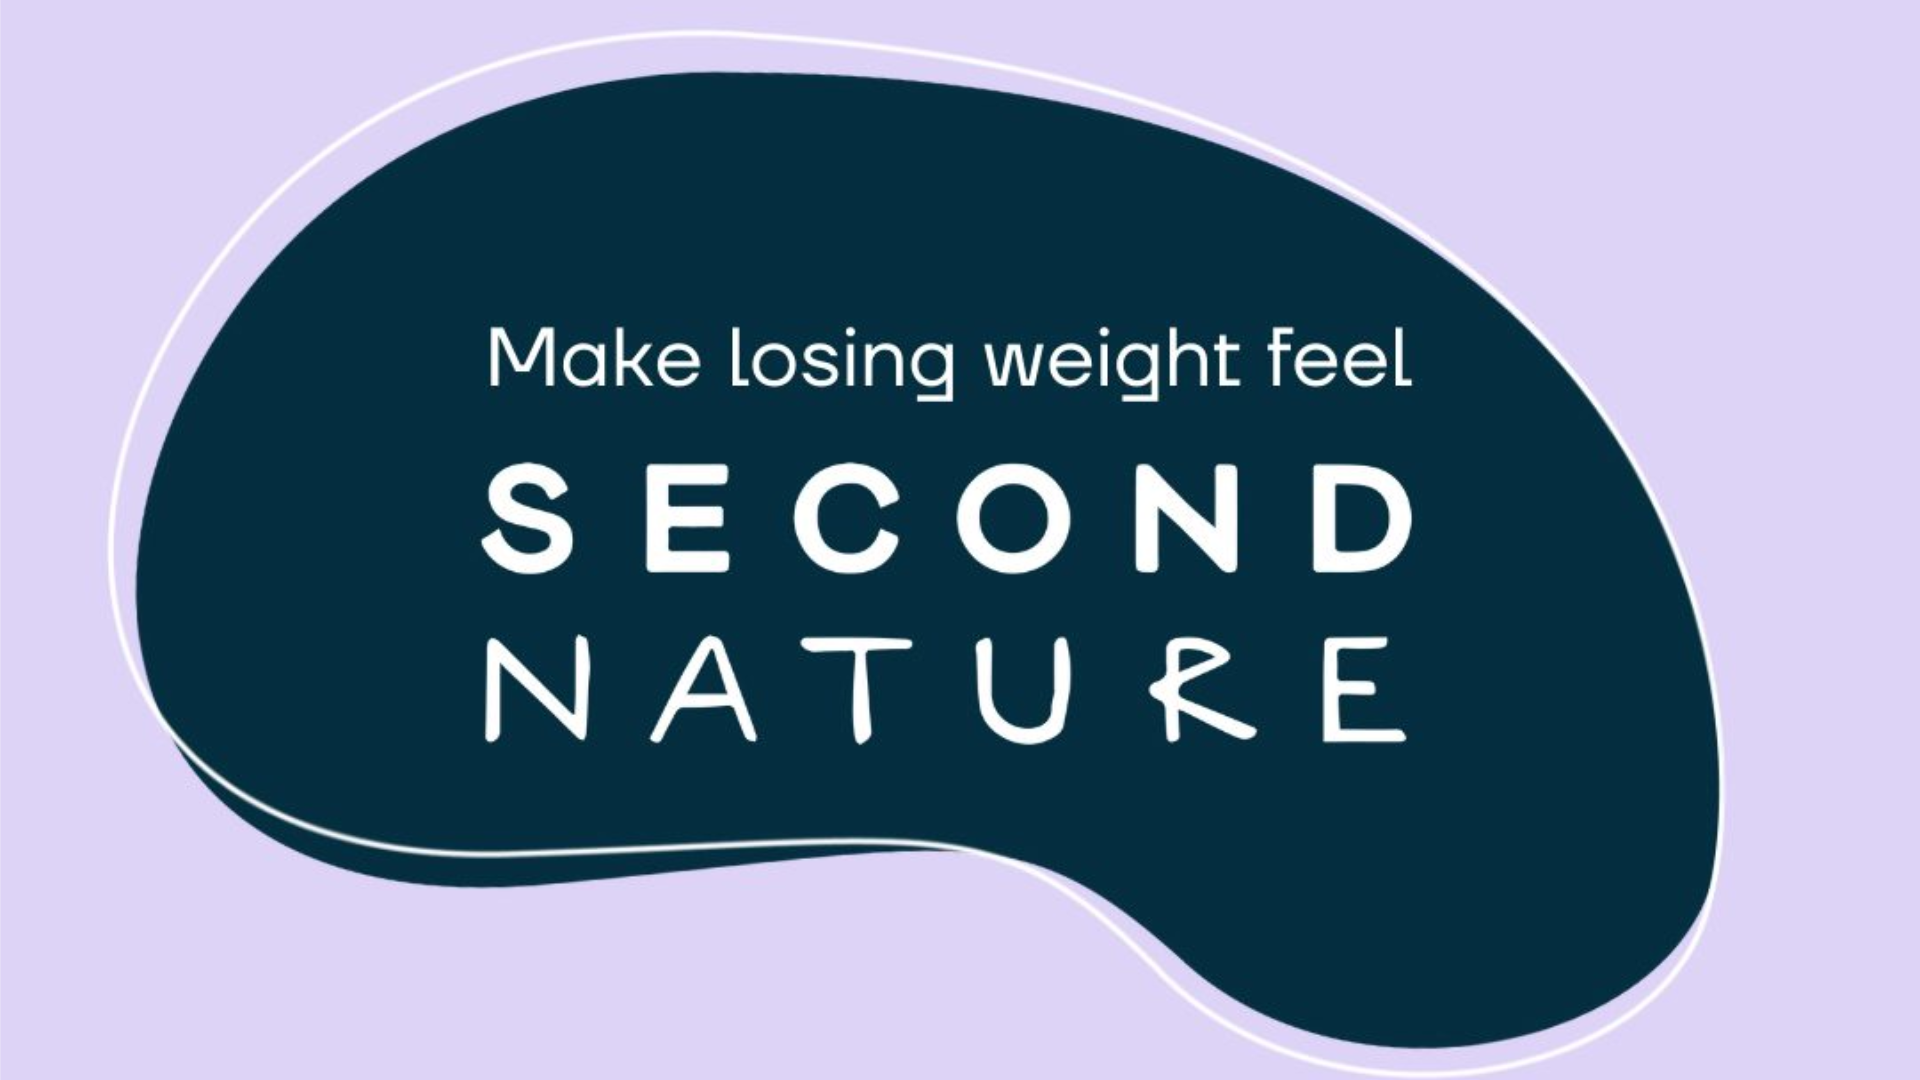 Second Nature Receives Award as Best Food & Nutrition Application